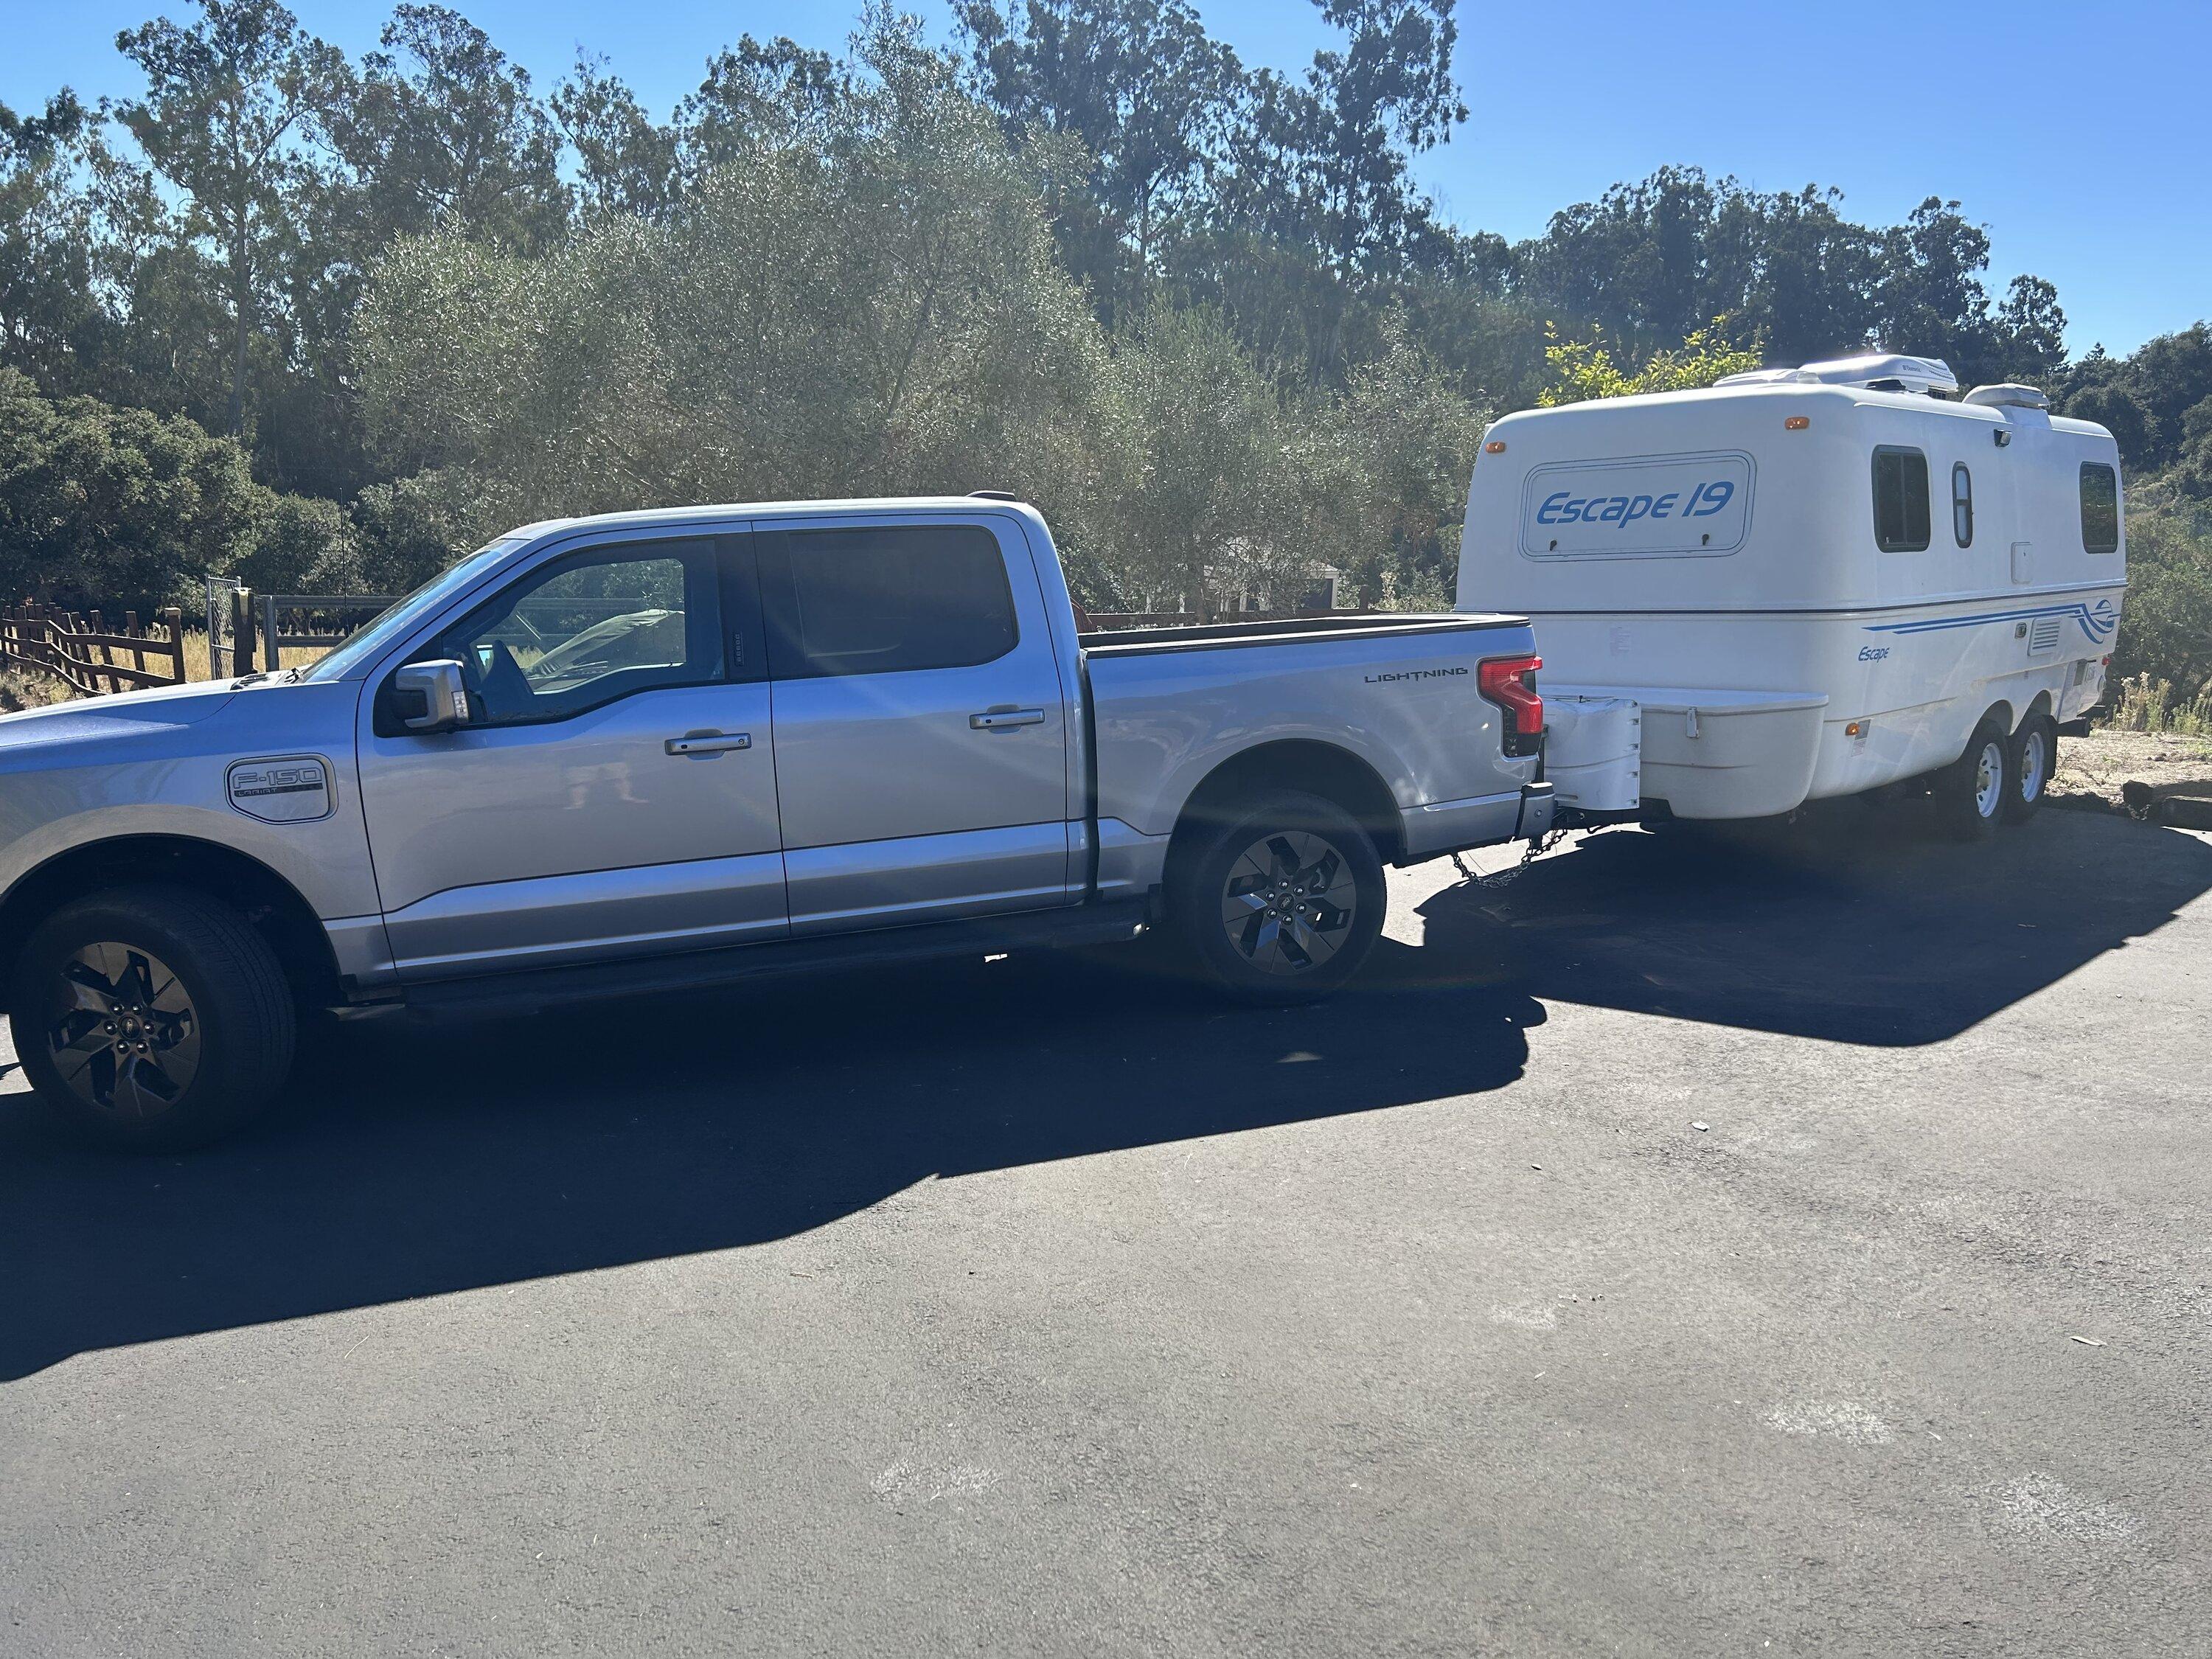 Ford F-150 Lightning Towing a 19’ Escape Trailer and using Pro Power IMG_4006